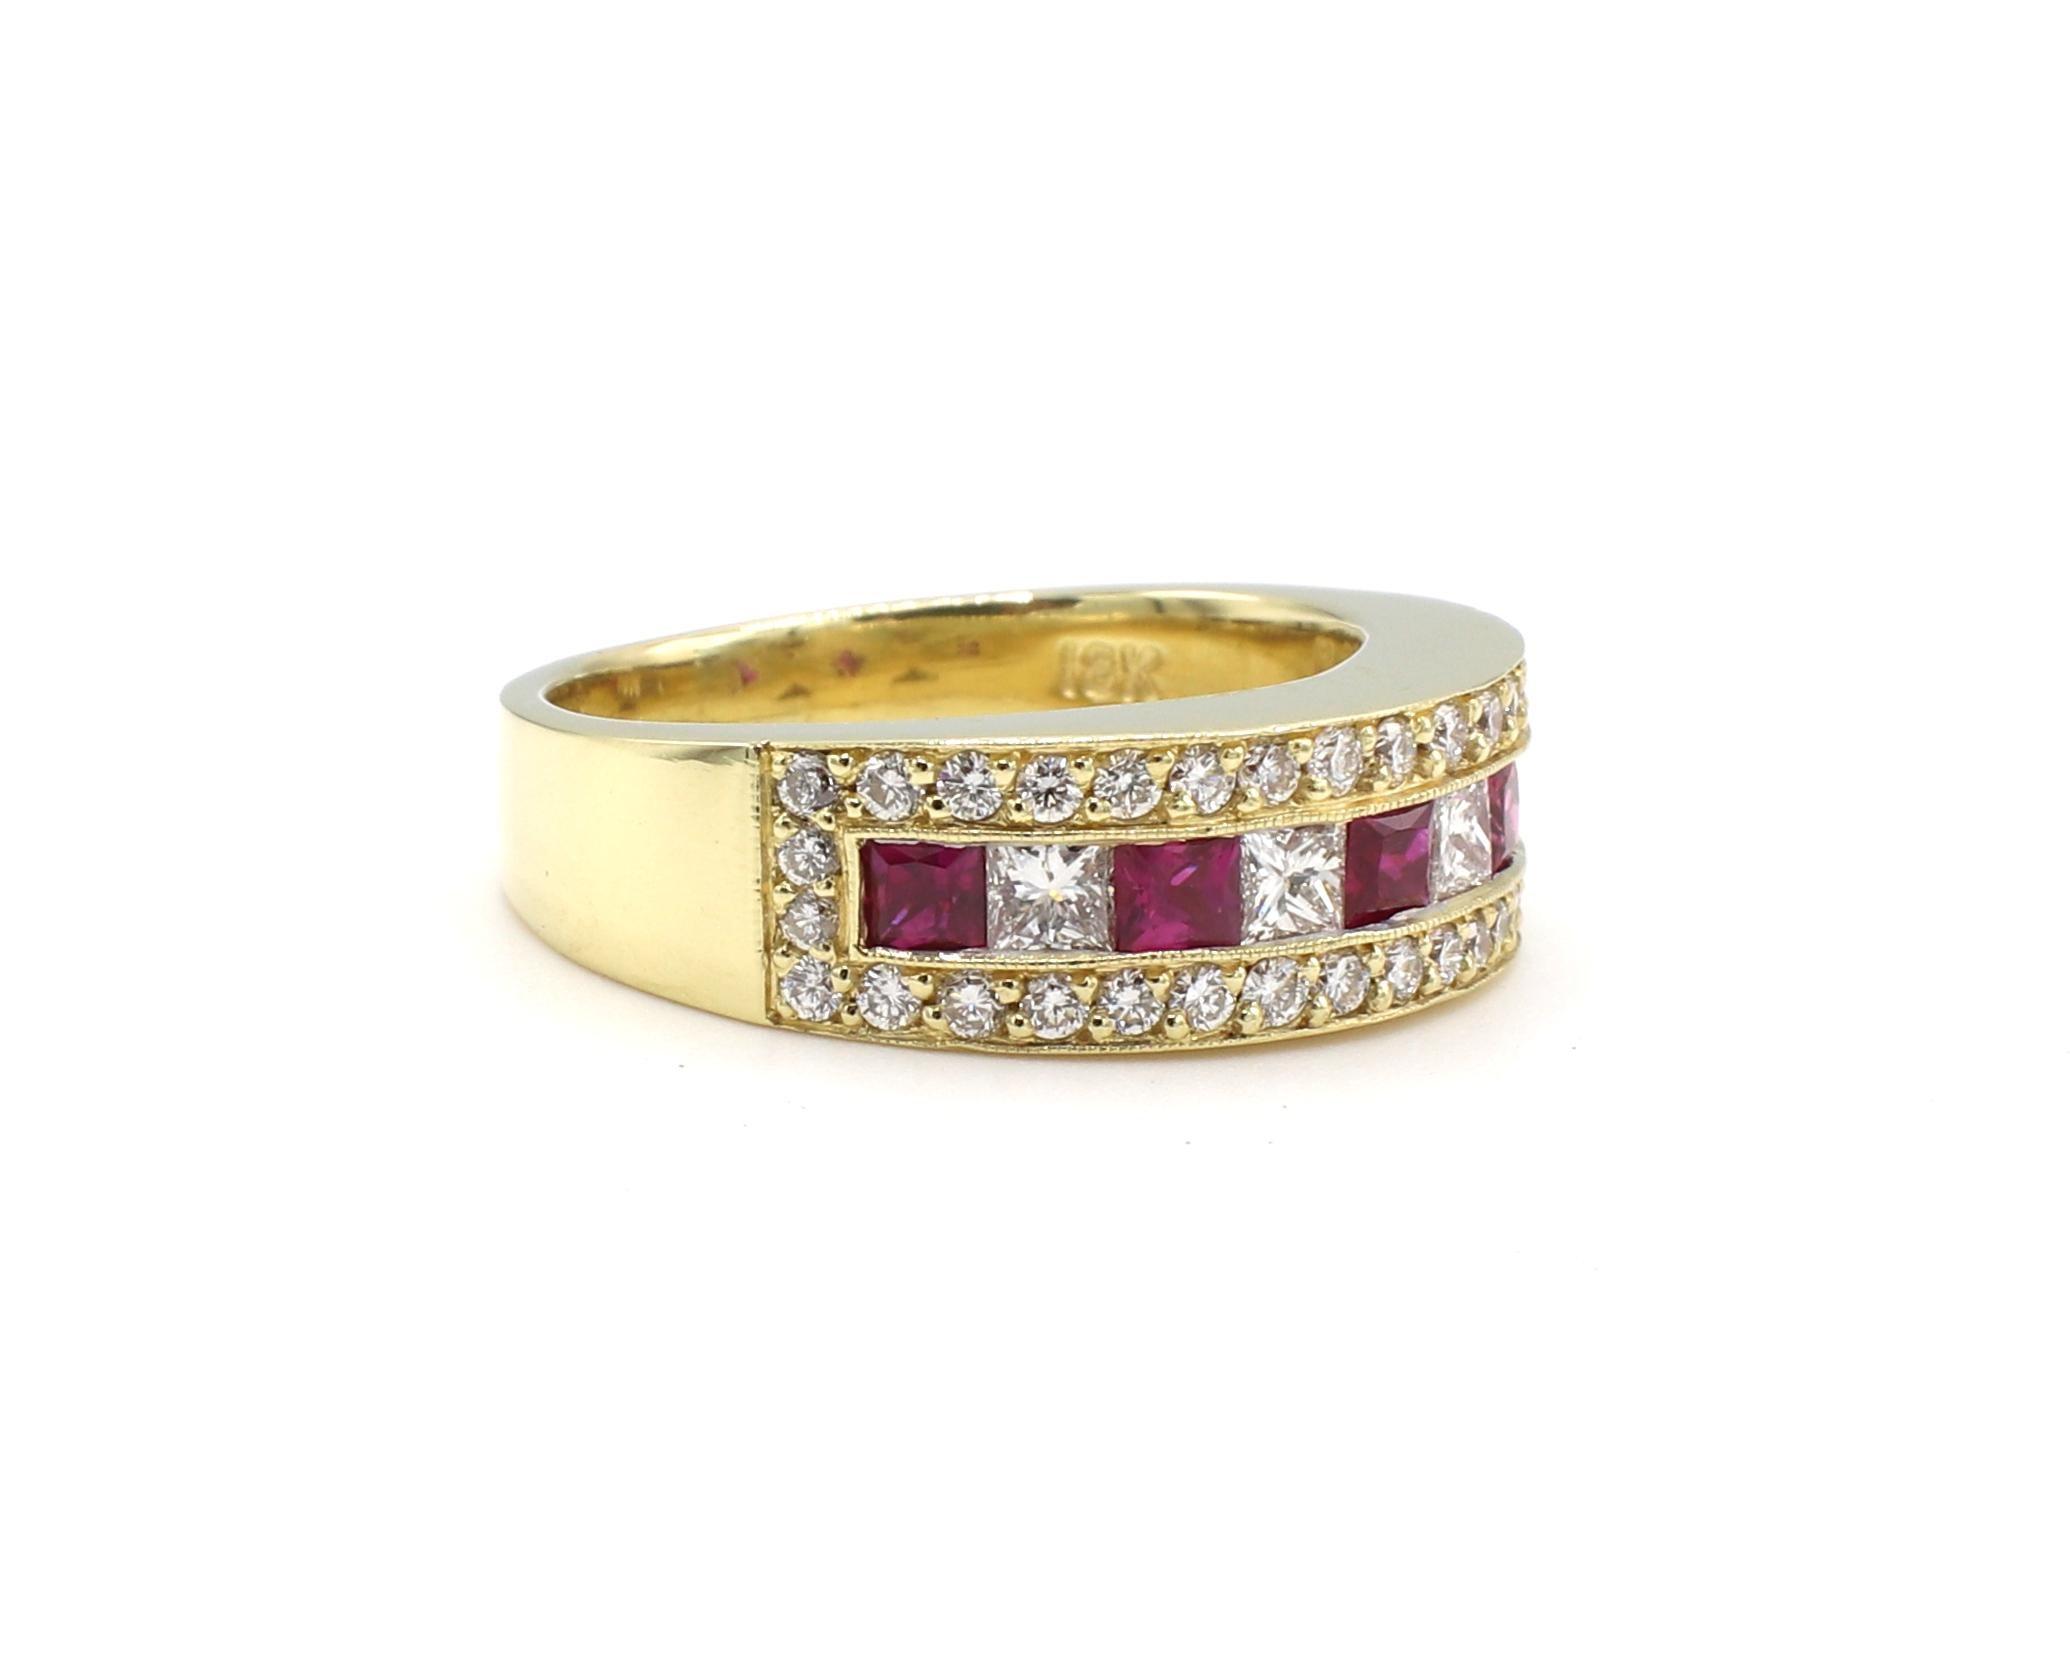 18 Karat Yellow Gold Ruby & Diamond Band Ring 
Metal: 18k yellow gold
Weight: 9.53 grams
Diamonds: Approx. .40 CTW G VS round and princess cut diamonds
Ruby: Approx. .60 CTW
Size: 7.75 (US)
Width: 4 - 7mm
